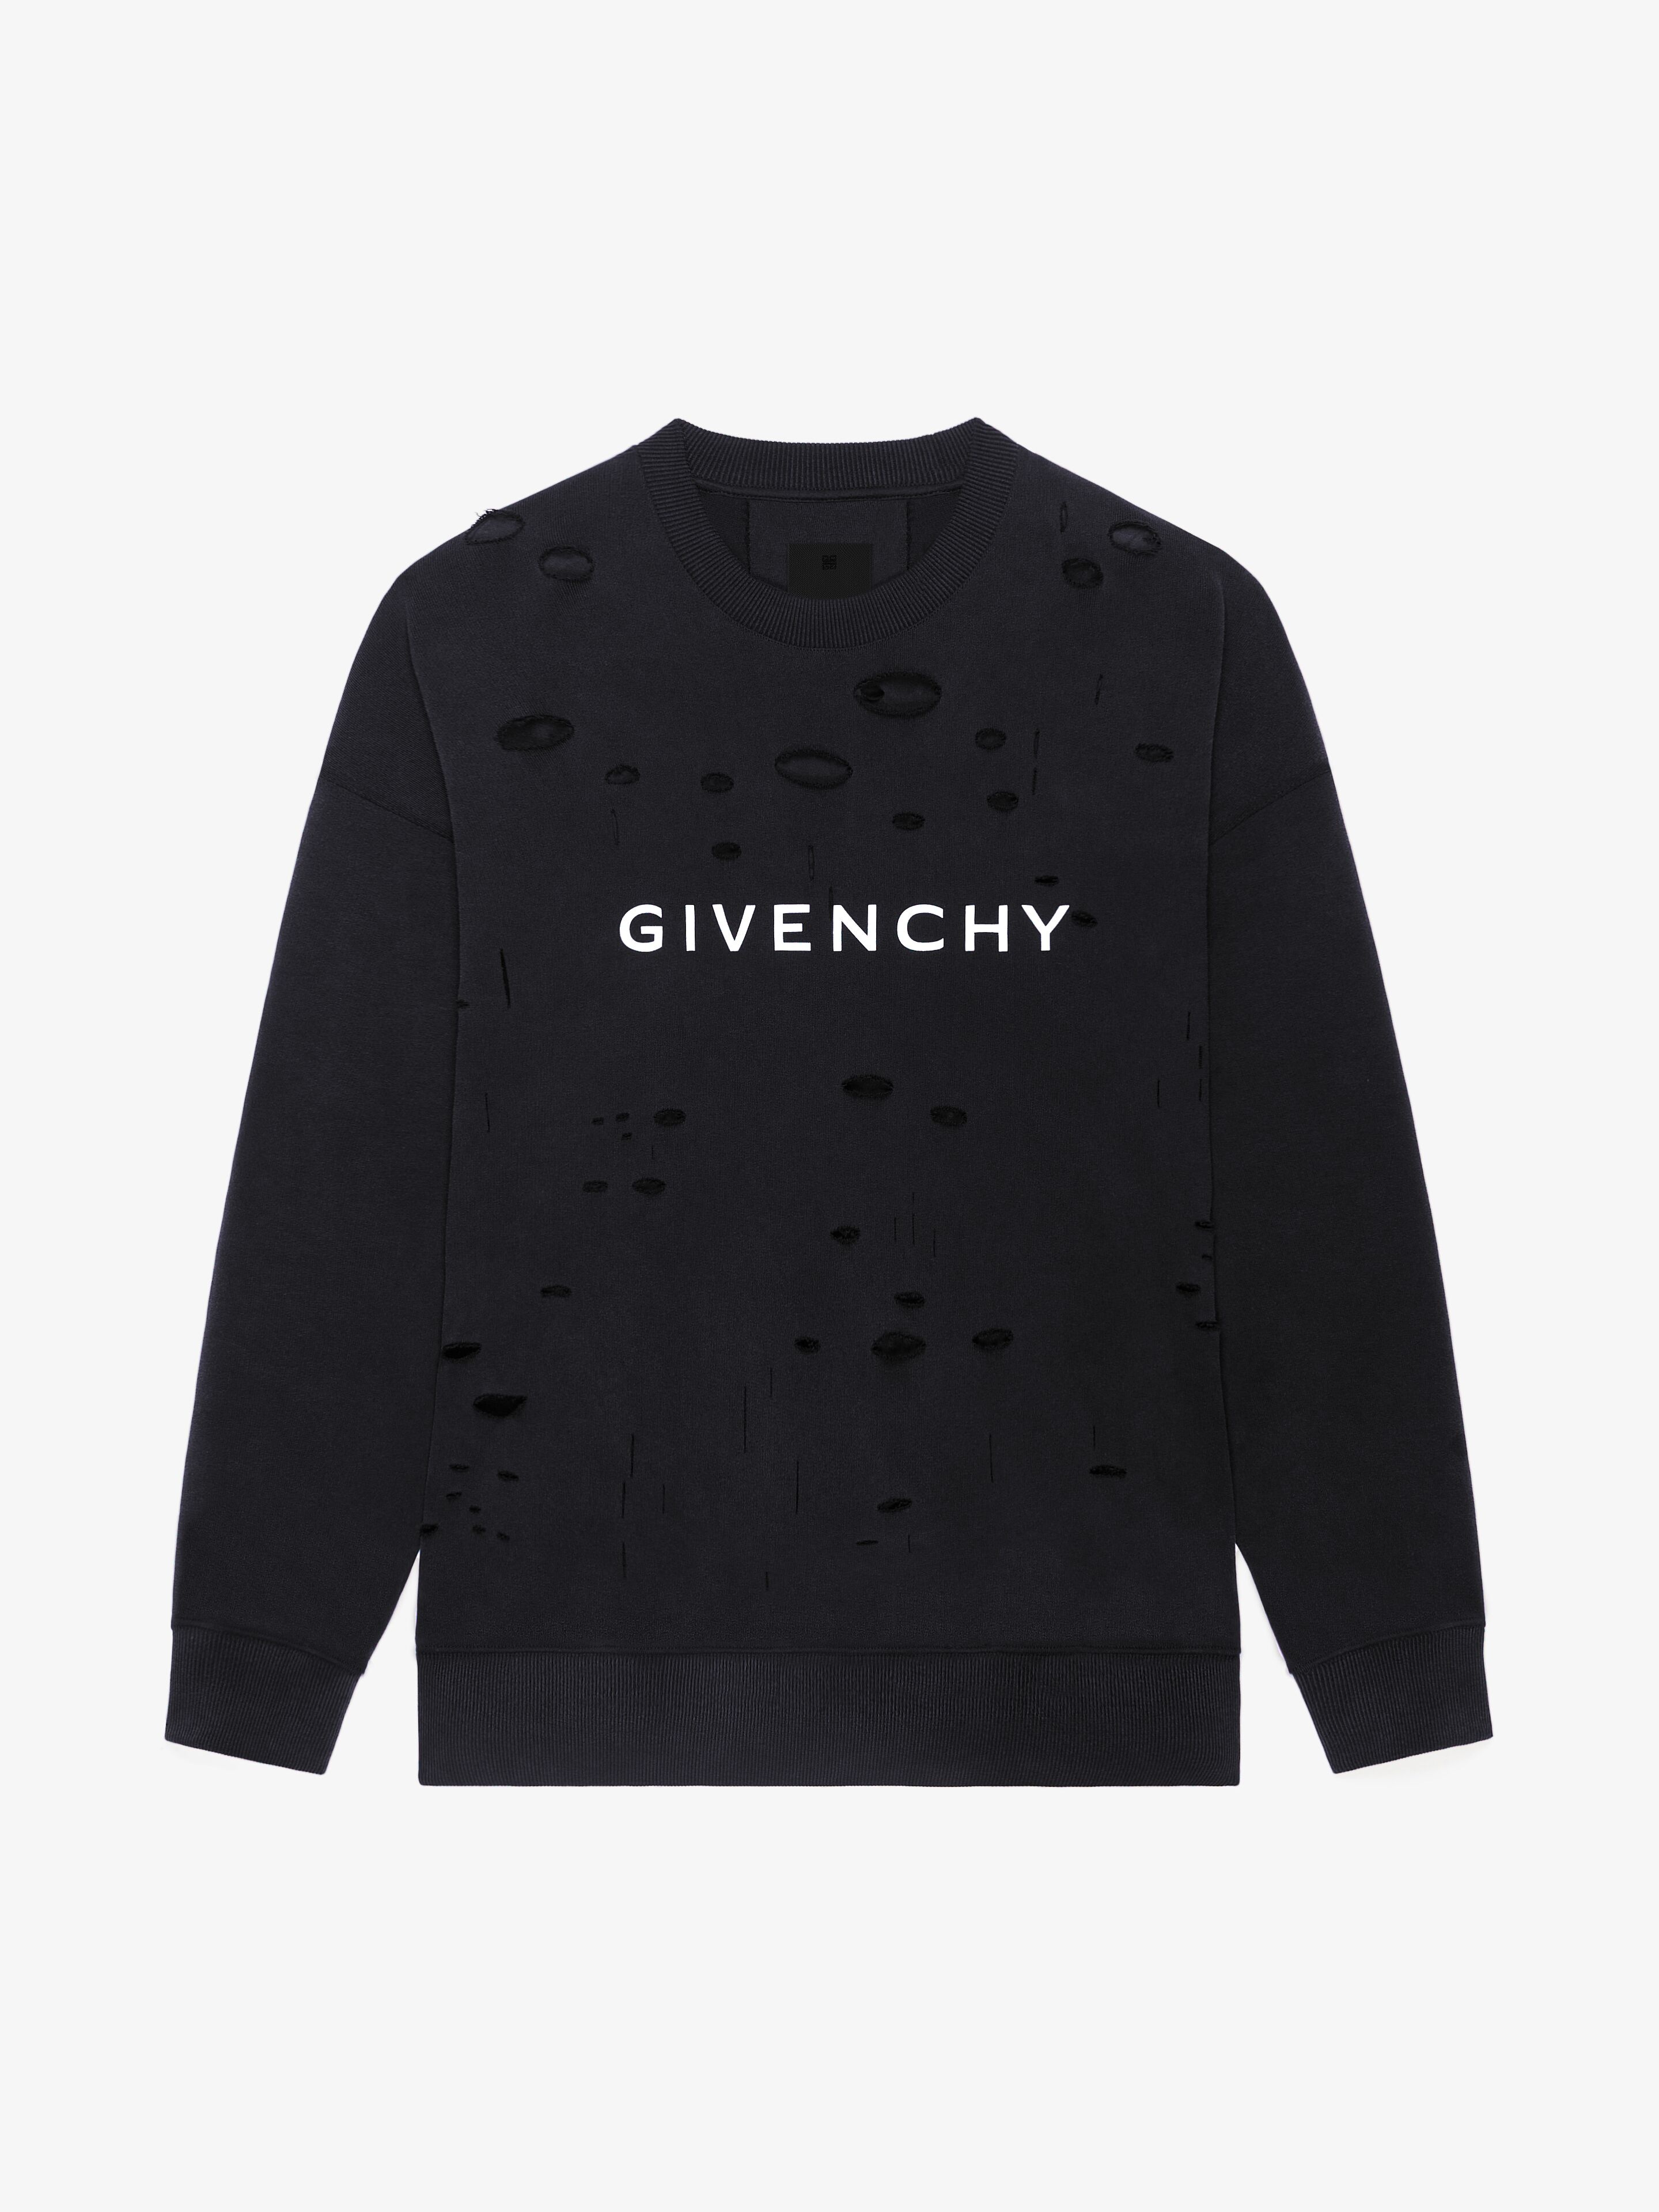 GIVENCHY ARCHETYPE SWEATSHIRT WITH DESTROYED EFFECT - 1